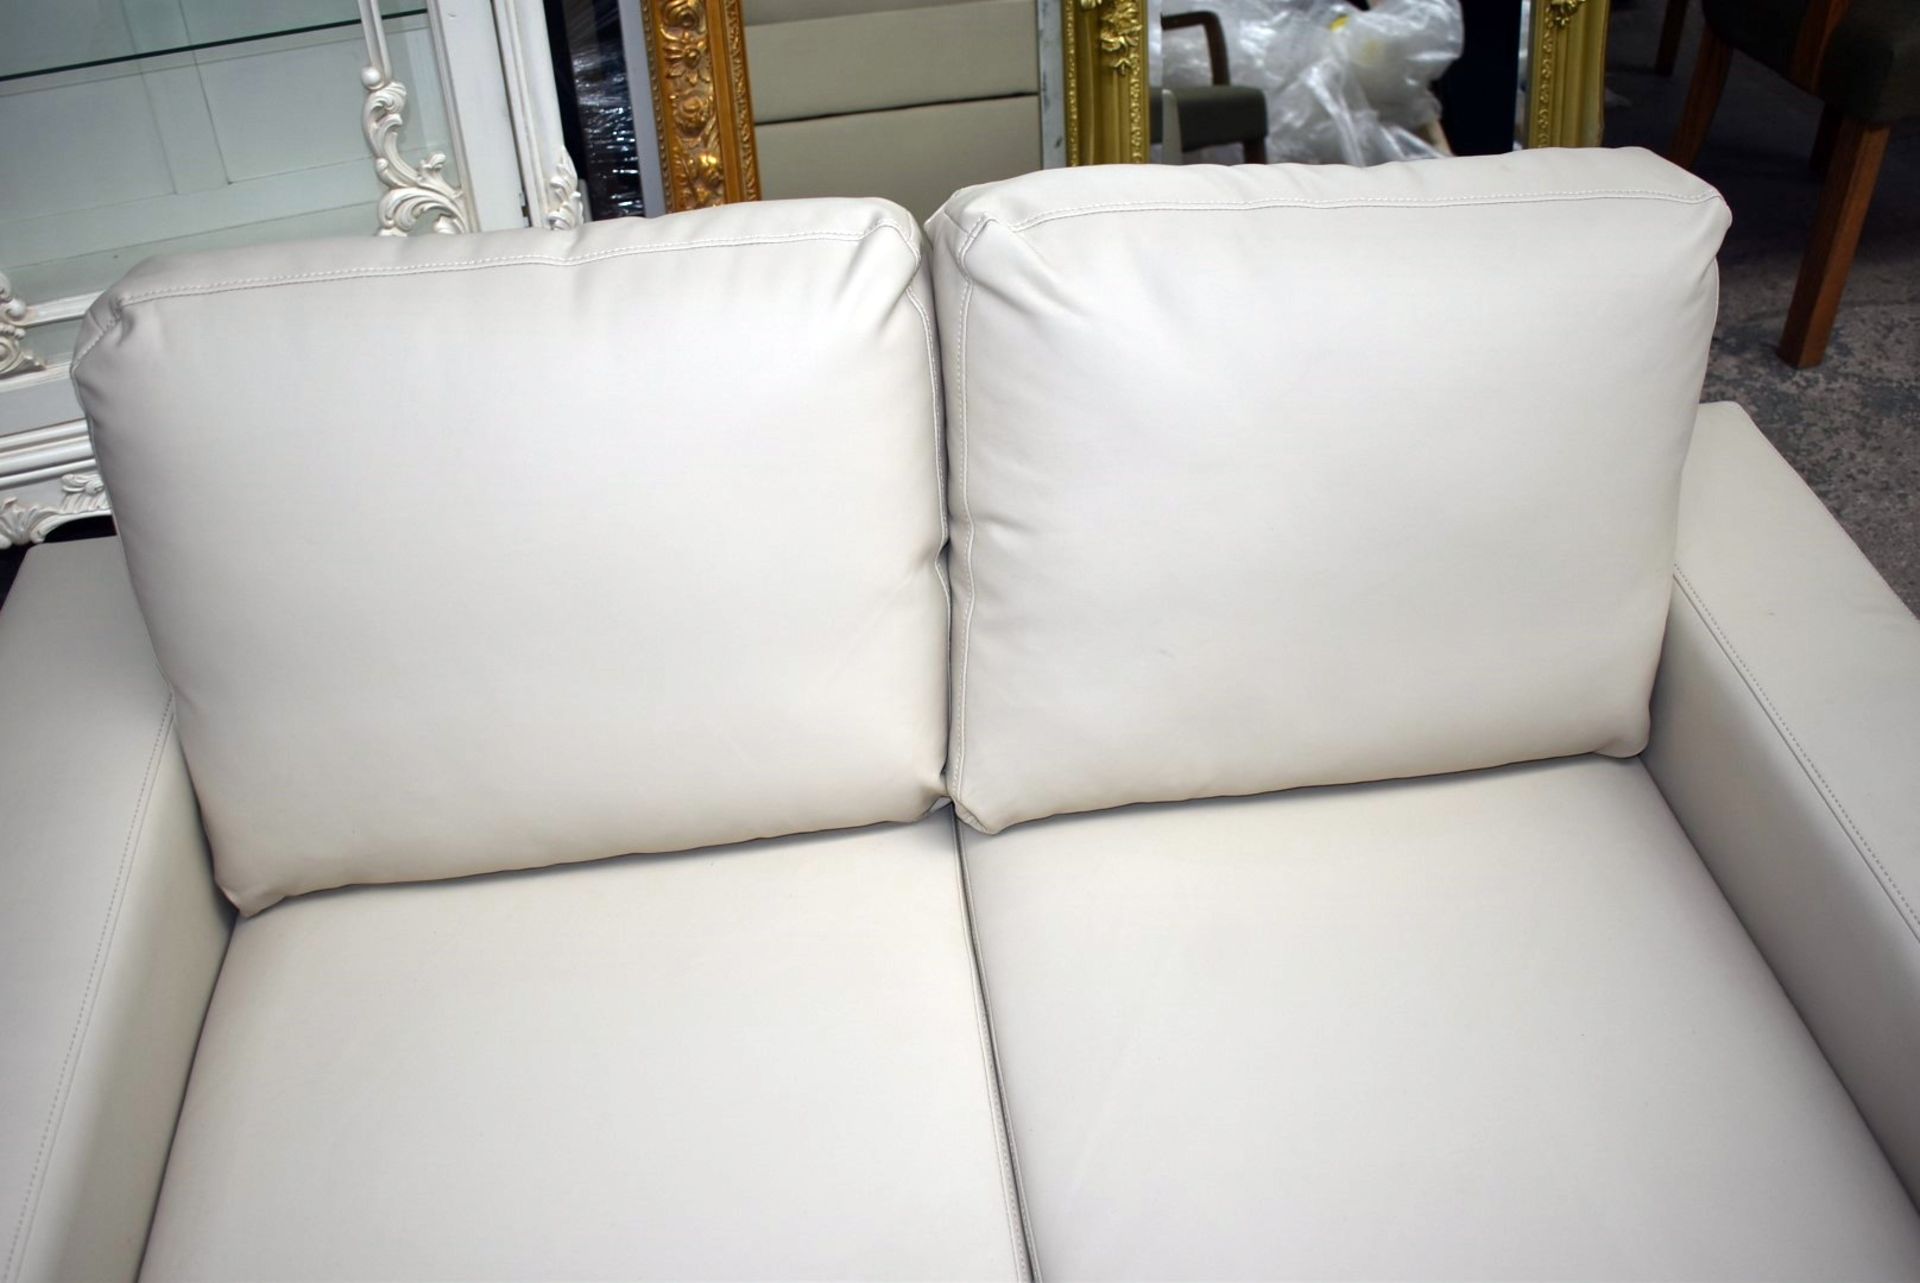 1 x Contemporary Two Seater Sofa in Faux Cream Leather - Ex Display - Dimensions: 146cm Width - Ref: - Image 4 of 8